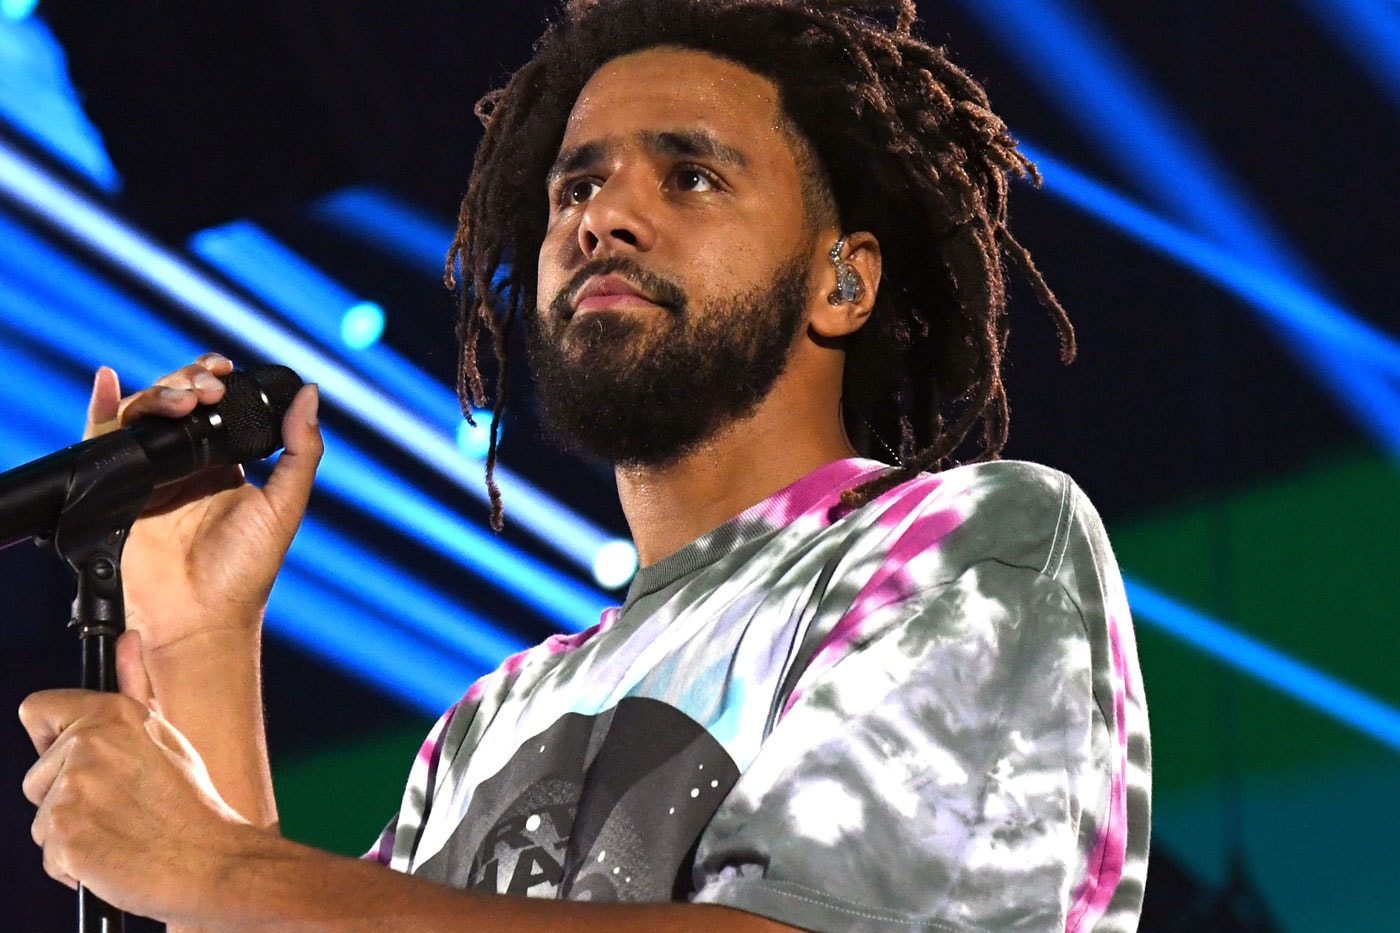 Watch Part Three of J. Cole & HBO's 'Road to Homecoming' Series